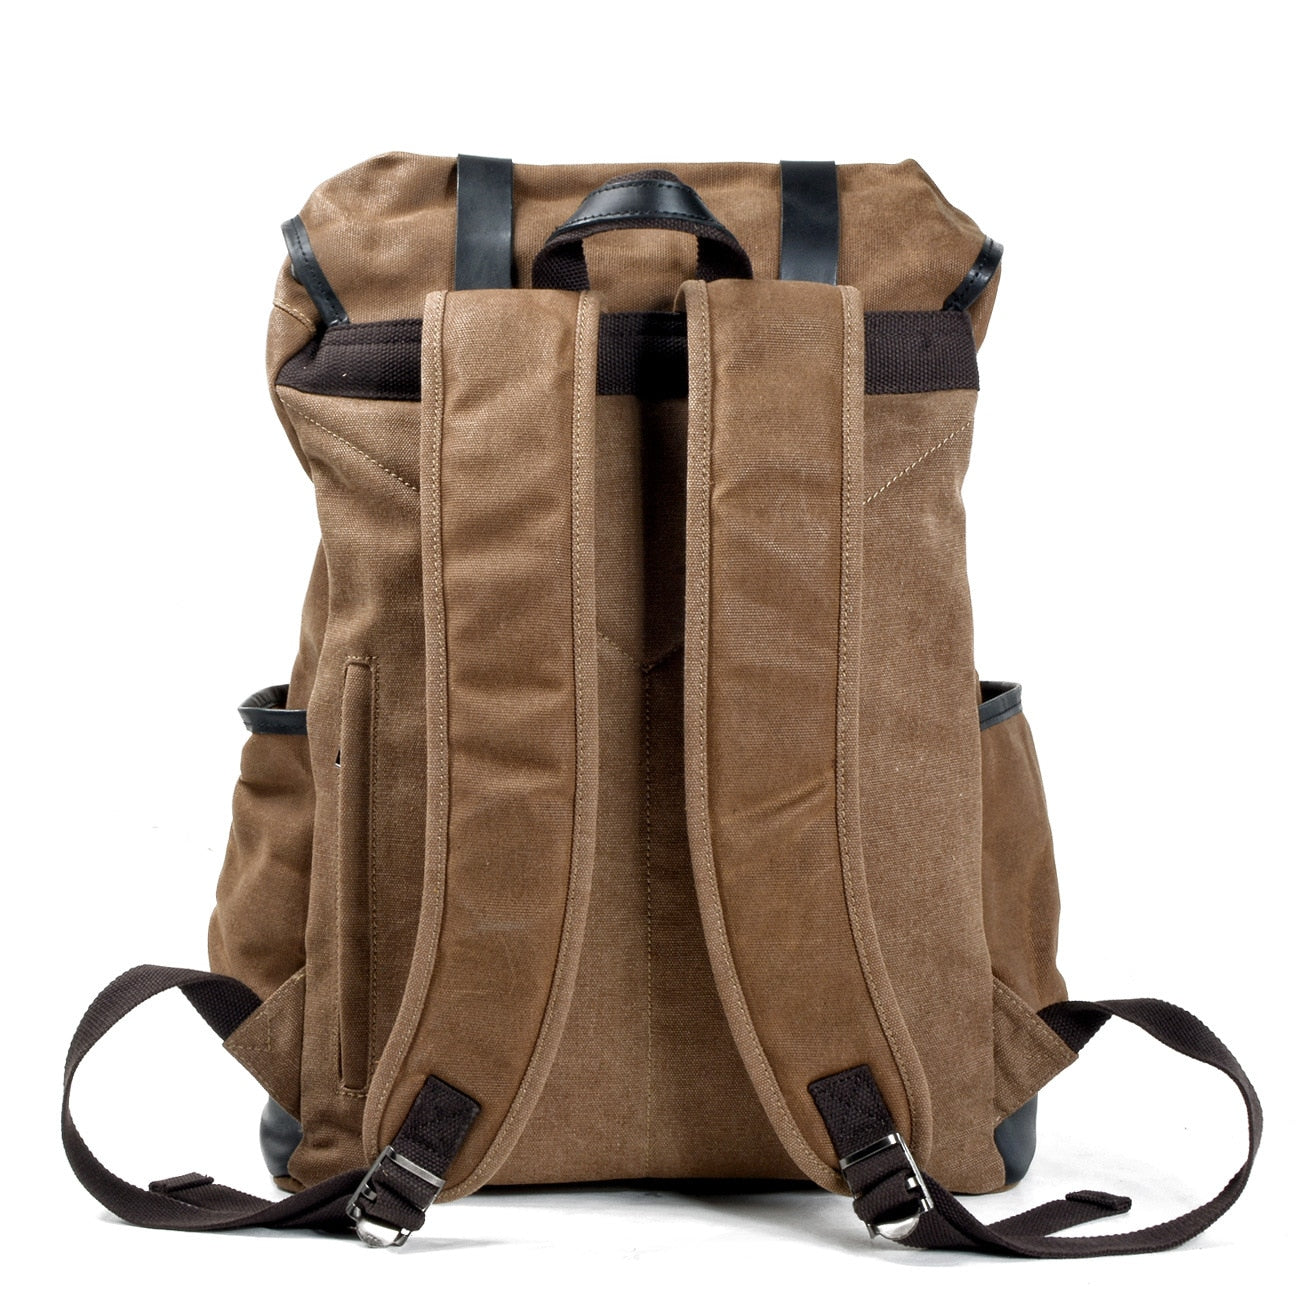 Retro Wax Canvas Leather Backpack